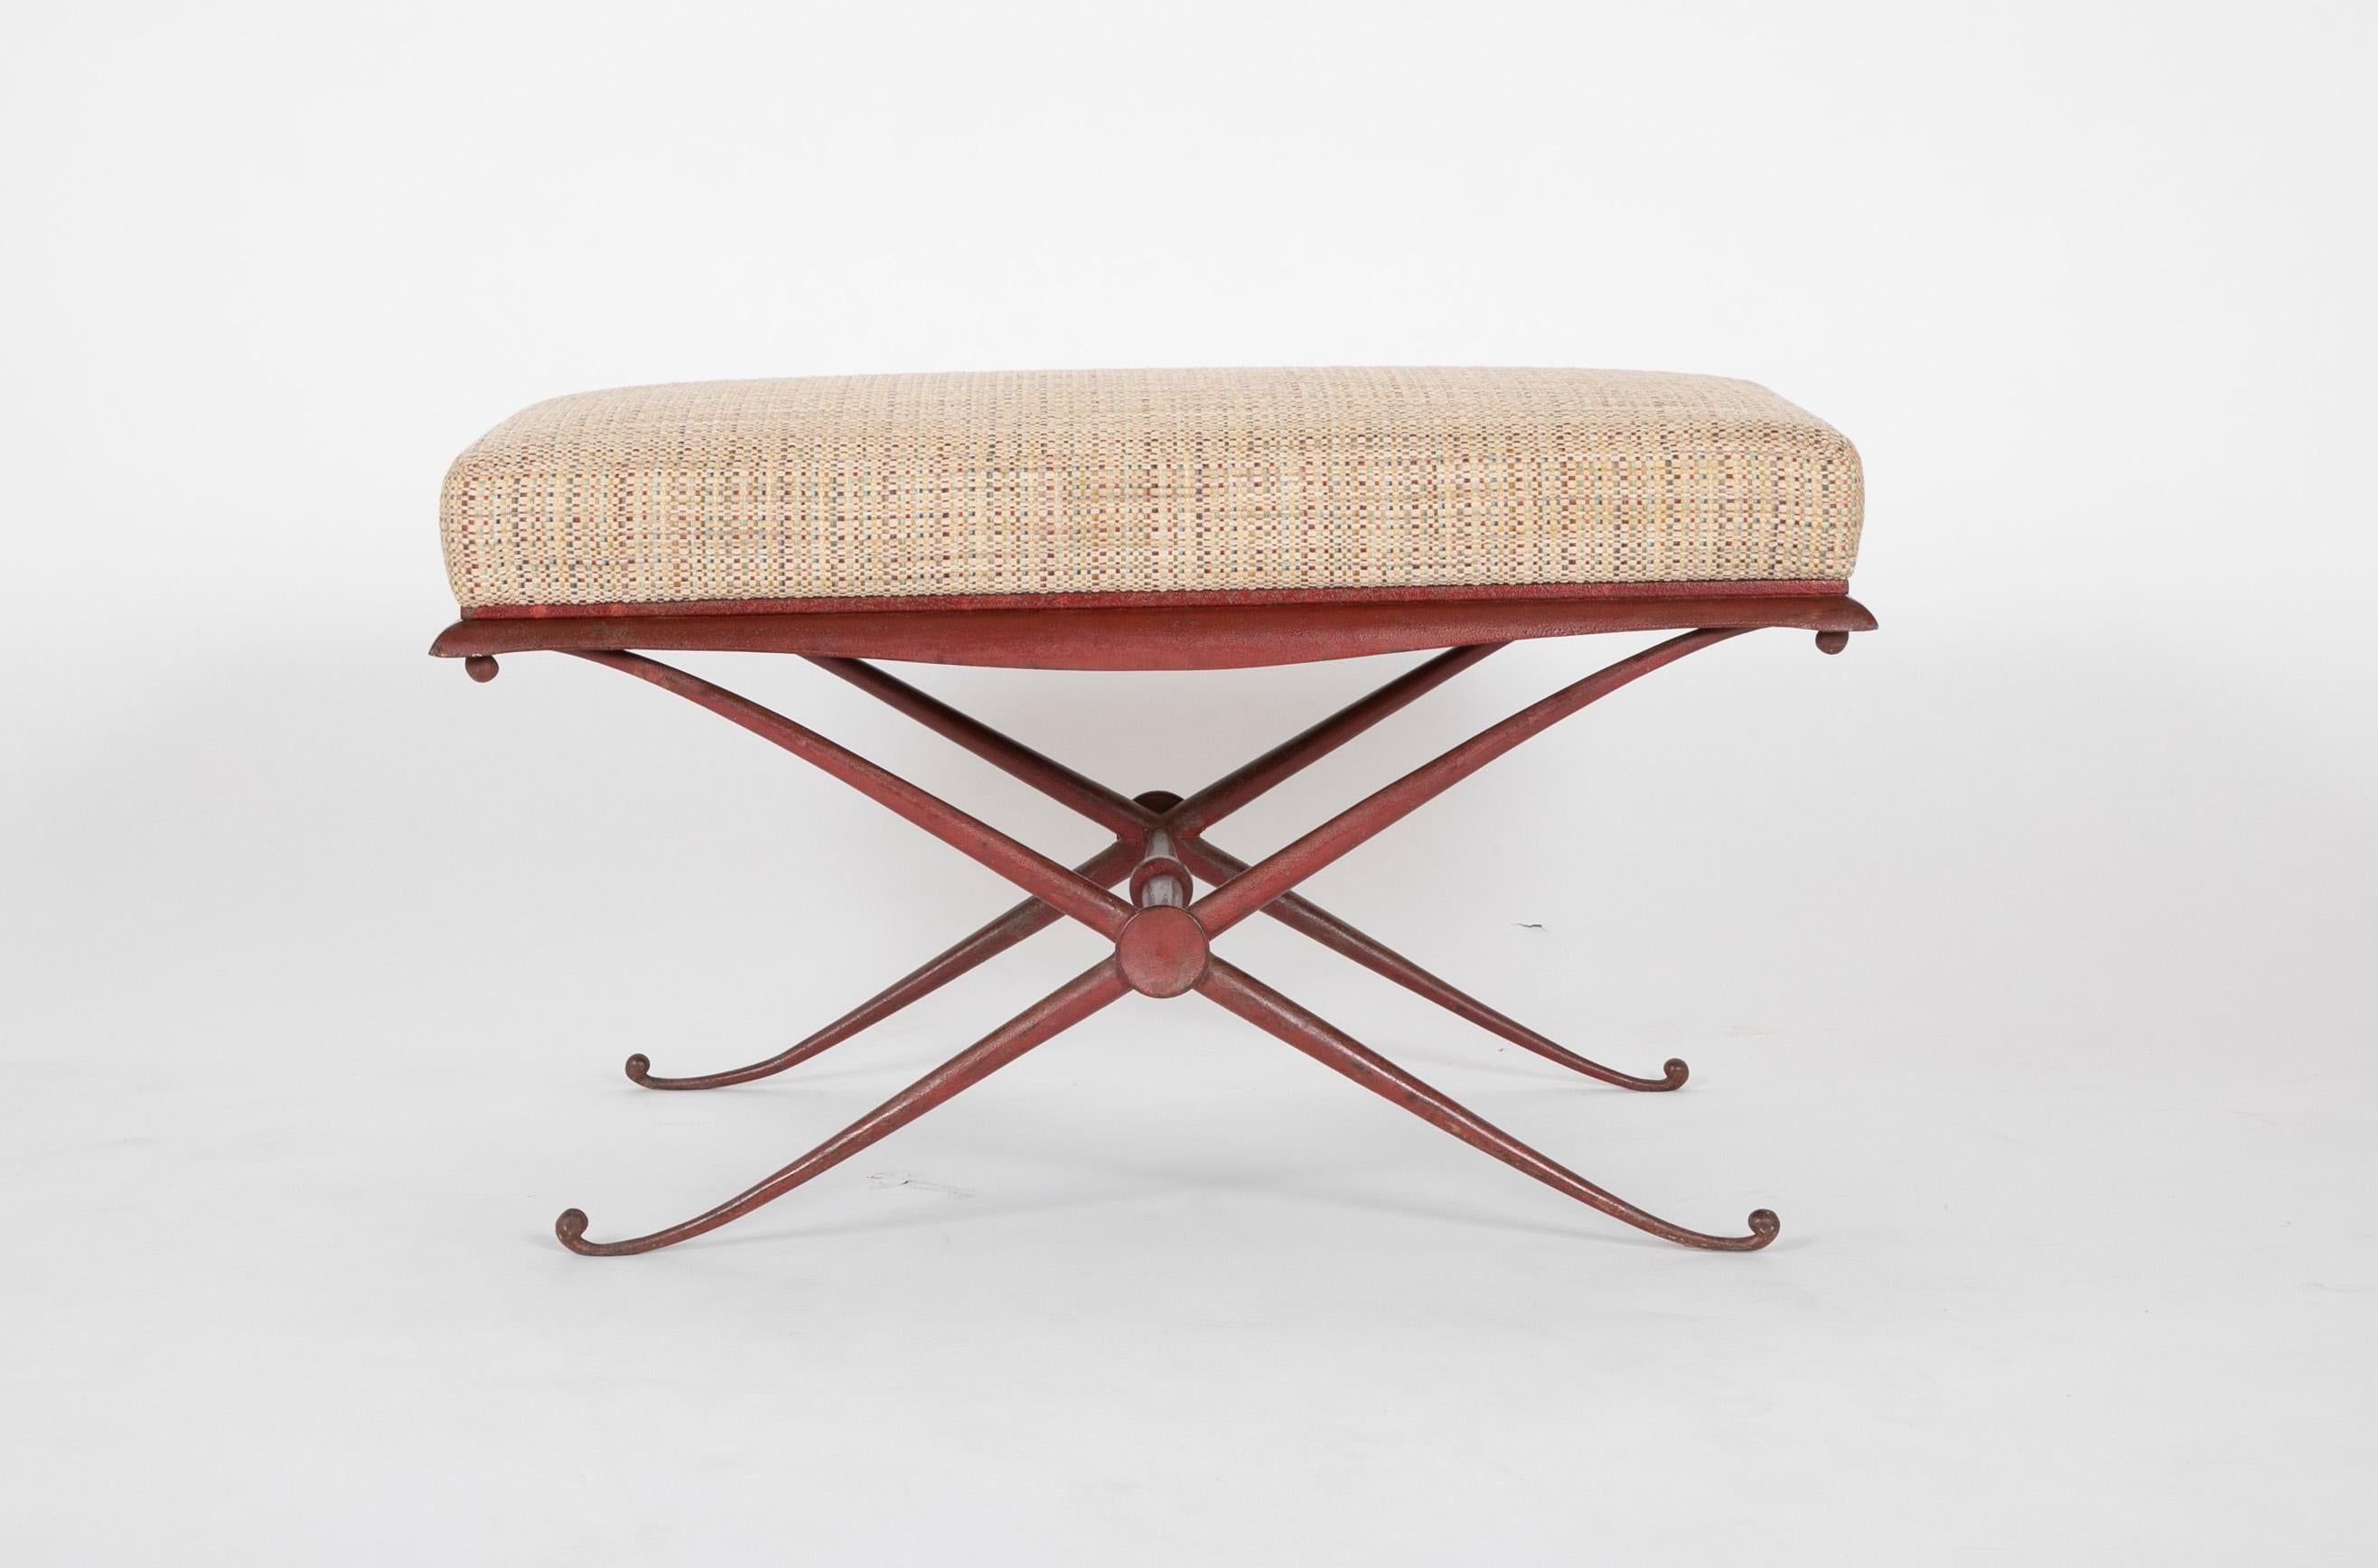 French Modern Polychrome Iron Bench in the Manner of Arbus